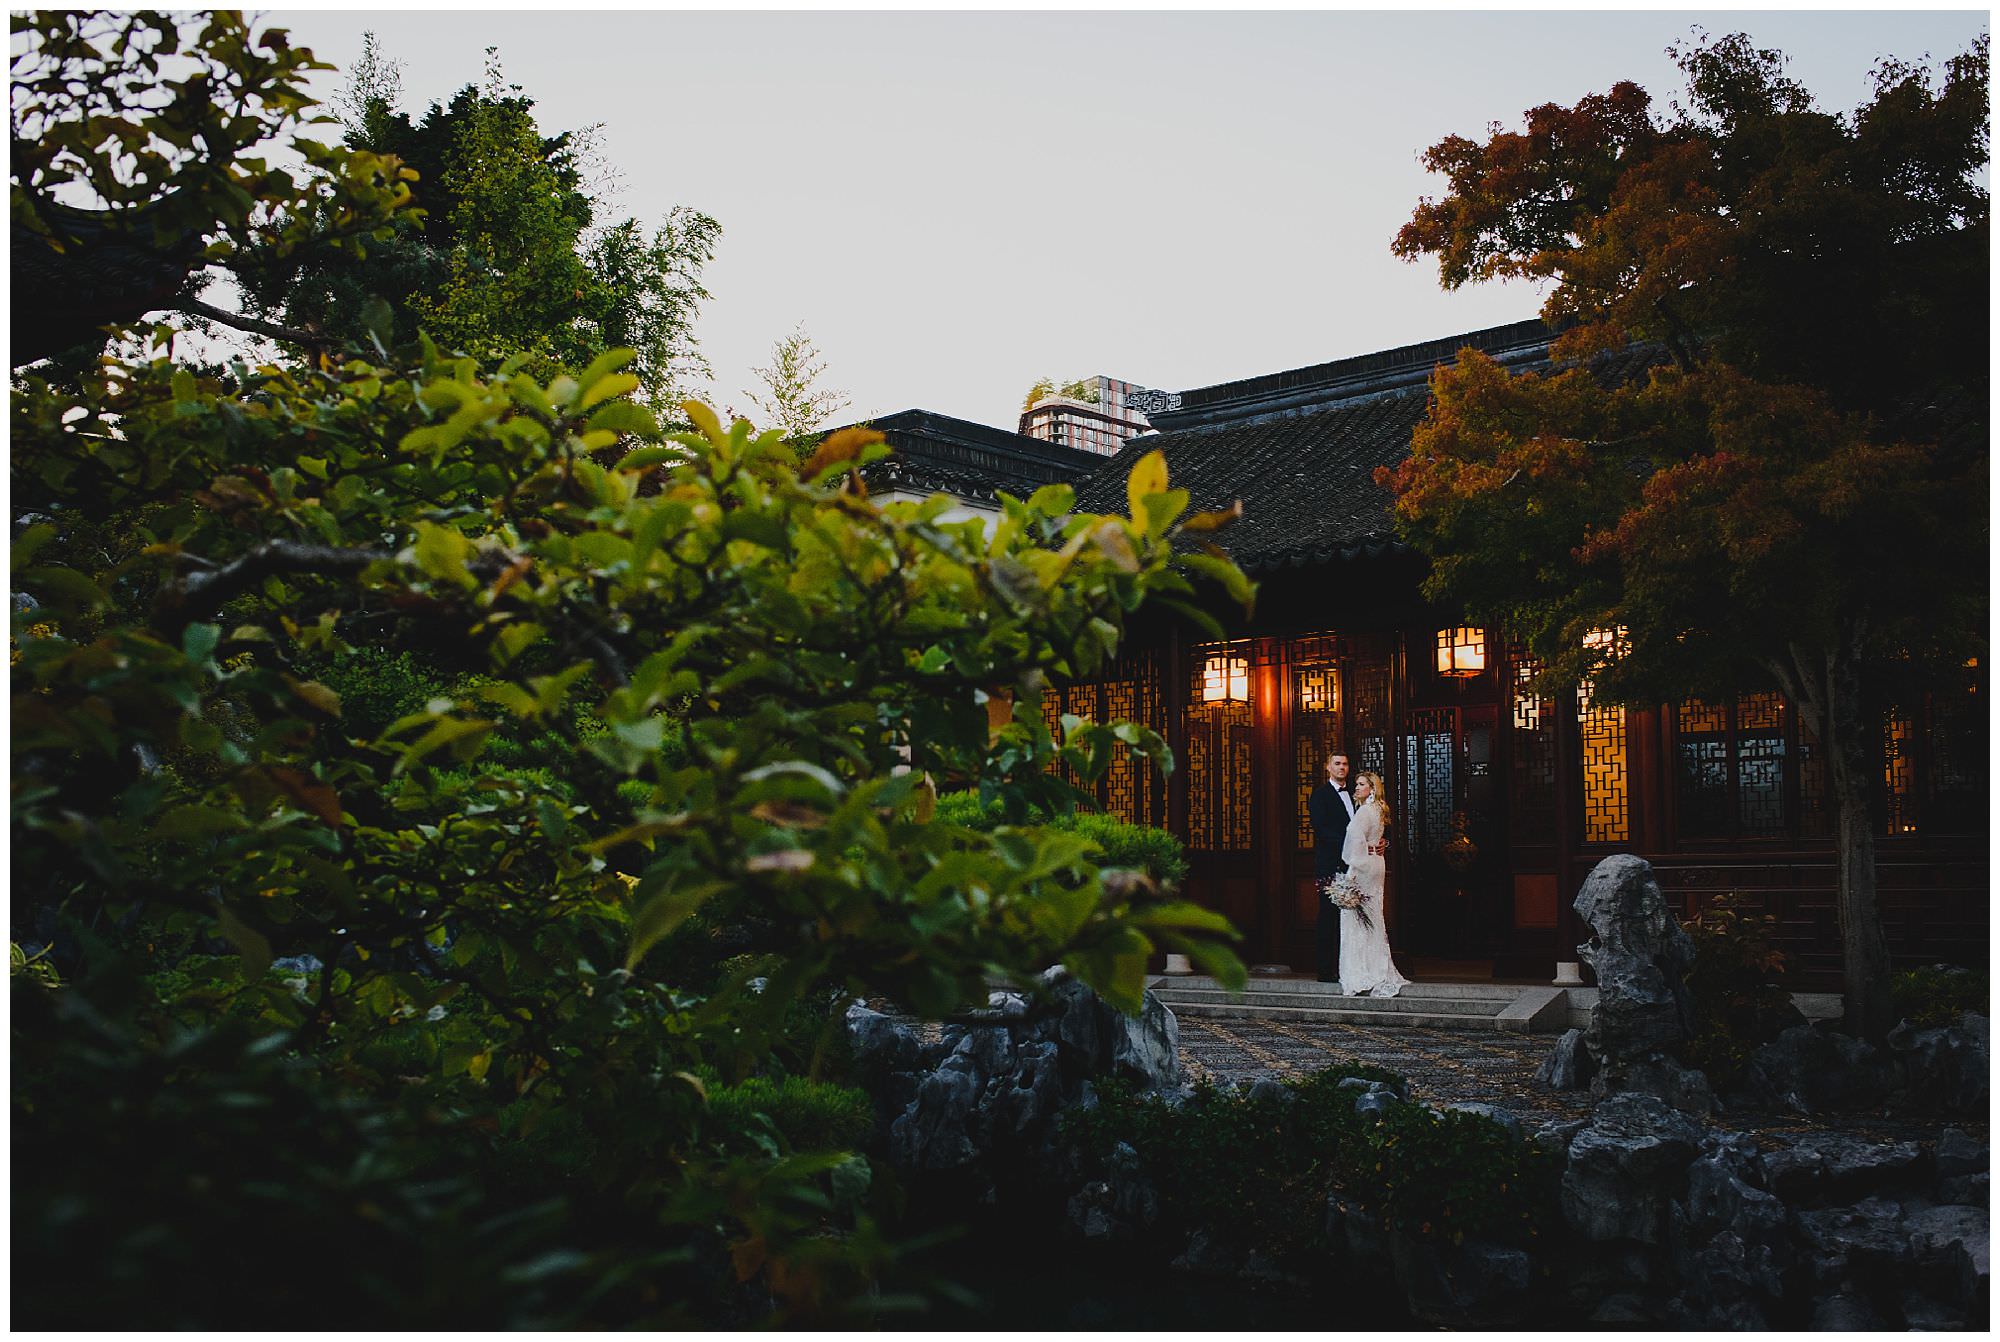 stylish bride and groom at sunset after their wedding ceremony at Dr. Sun Yat-Sen Classical Chinese Gardens, elopement, intimate wedding, candid wedding photography, downtown Vancouver wedding photo